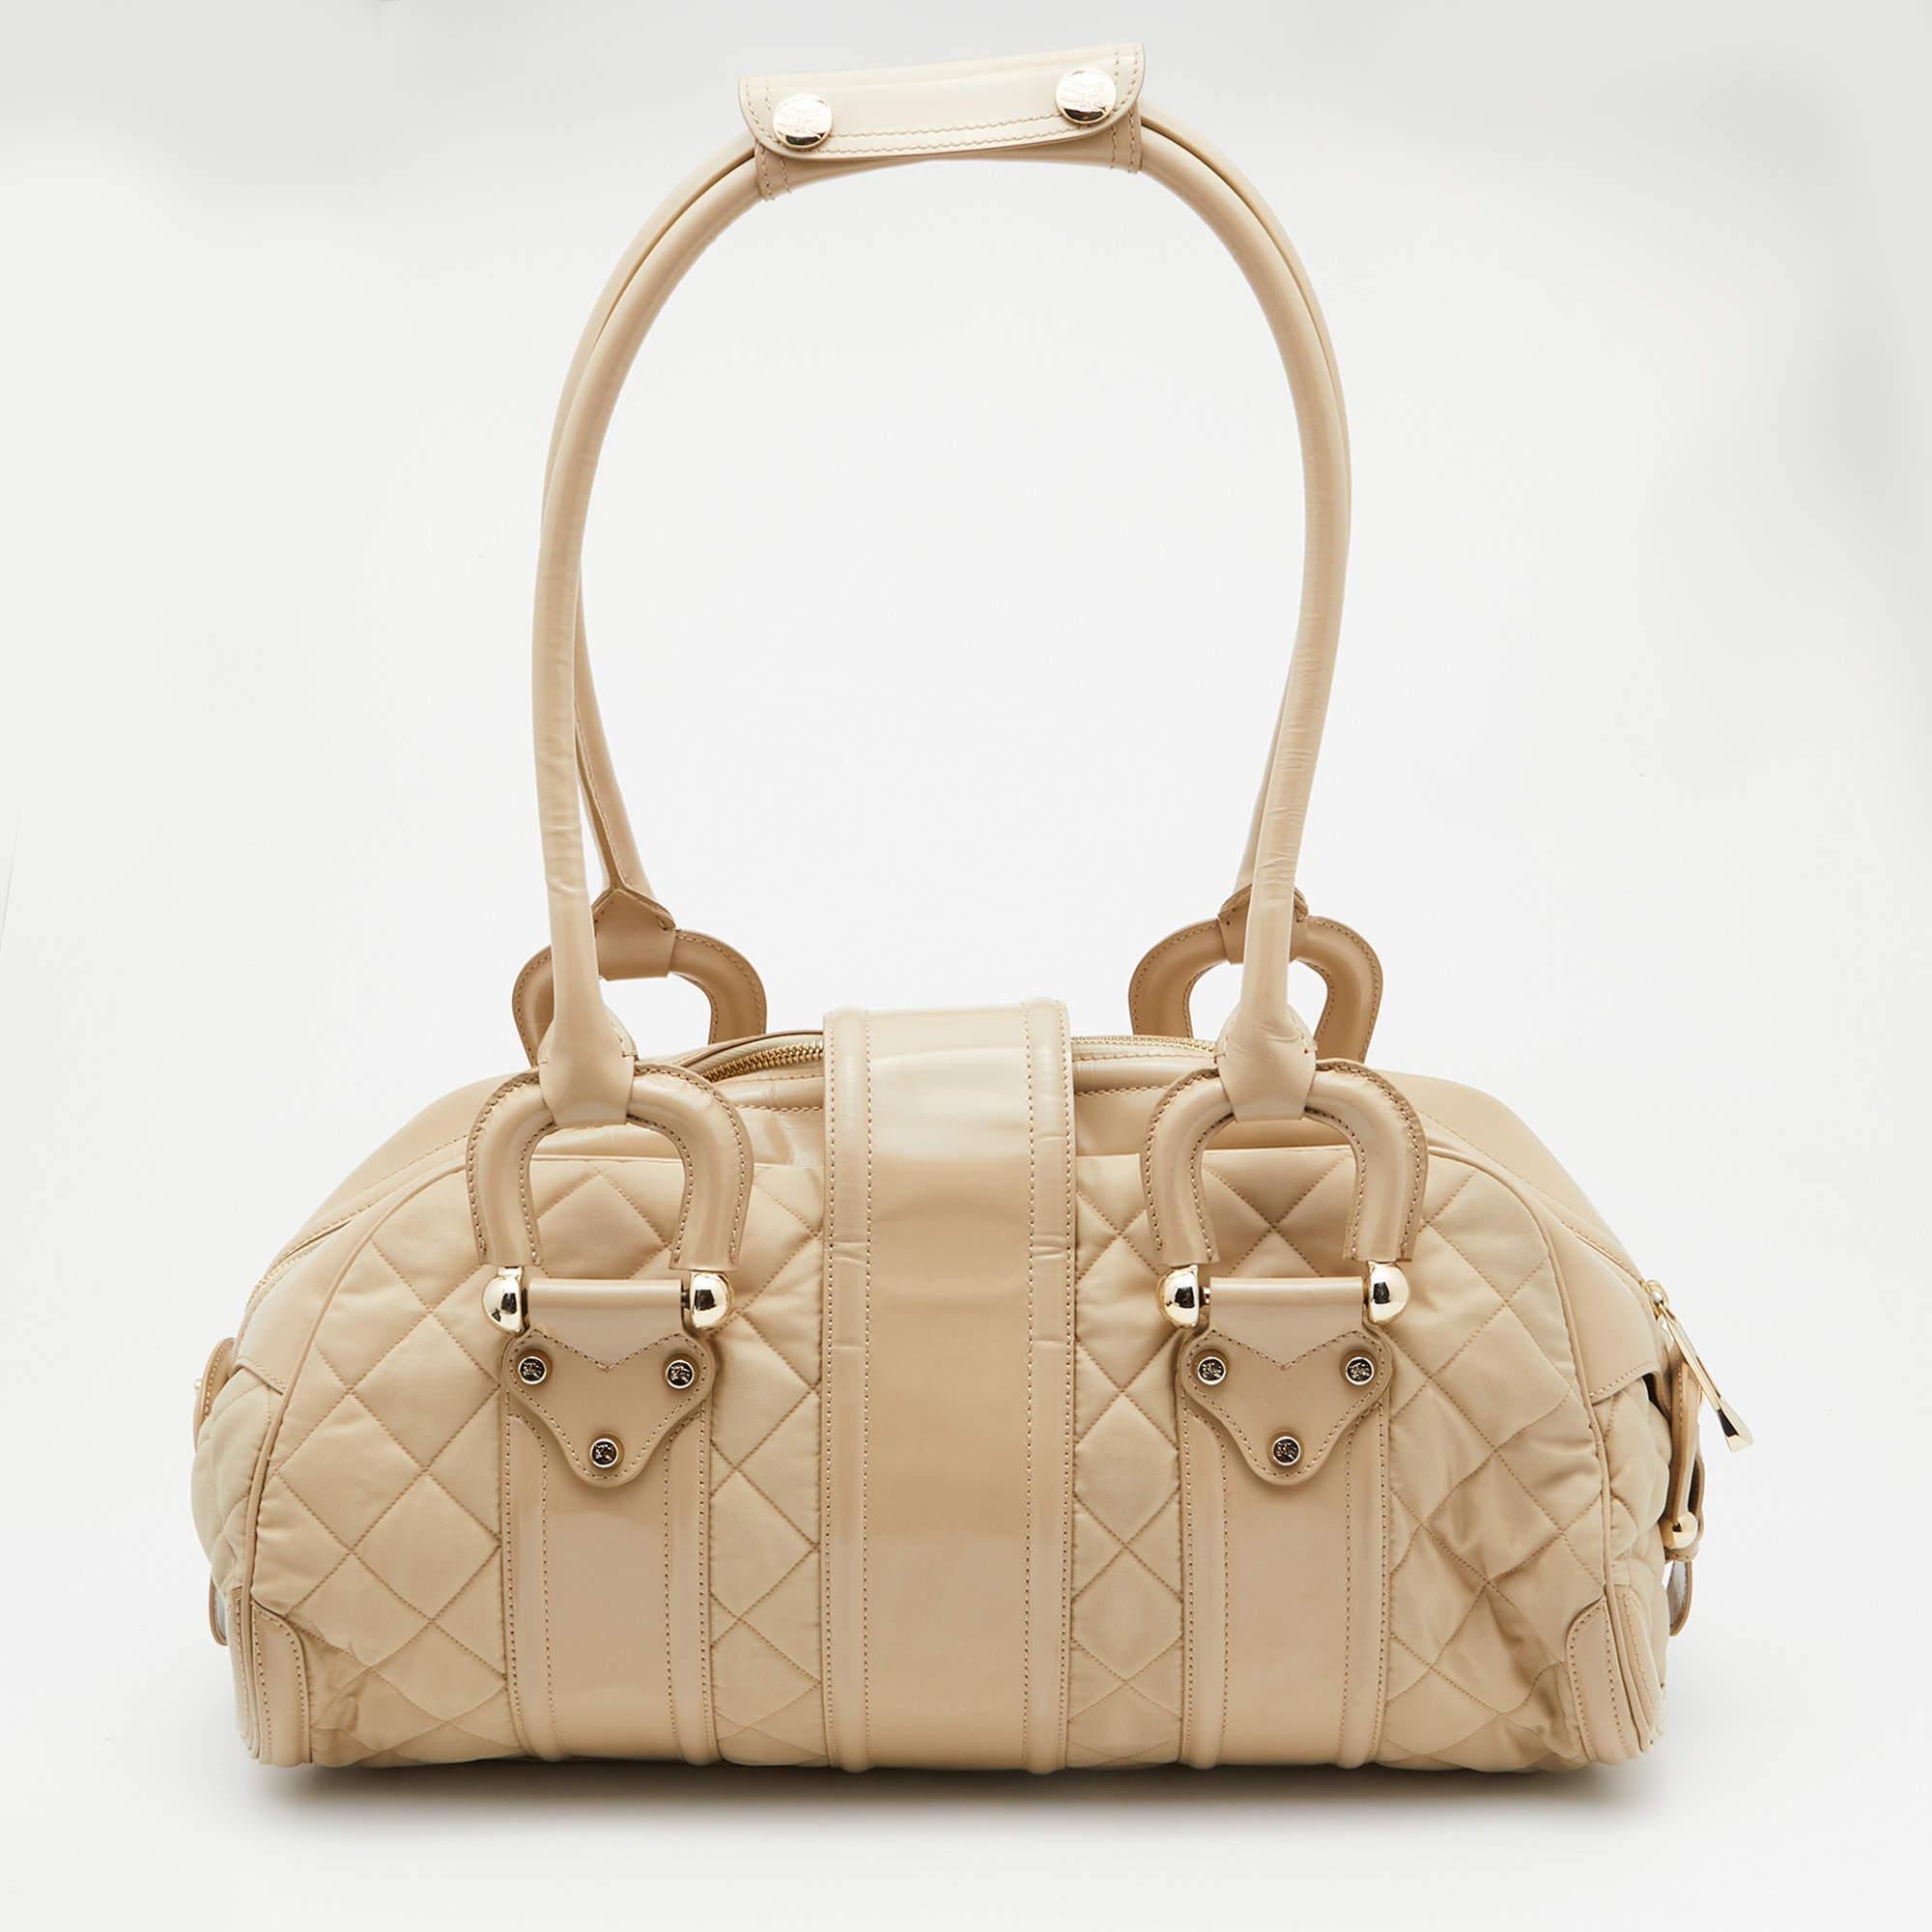 Made from quilted nylon and leather, this one will make a spectacular addition to any contemporary outfit. This practical and stylish satchel in a beautiful beige colour can be paired with multiple attires. The interior is lined with fabric and it